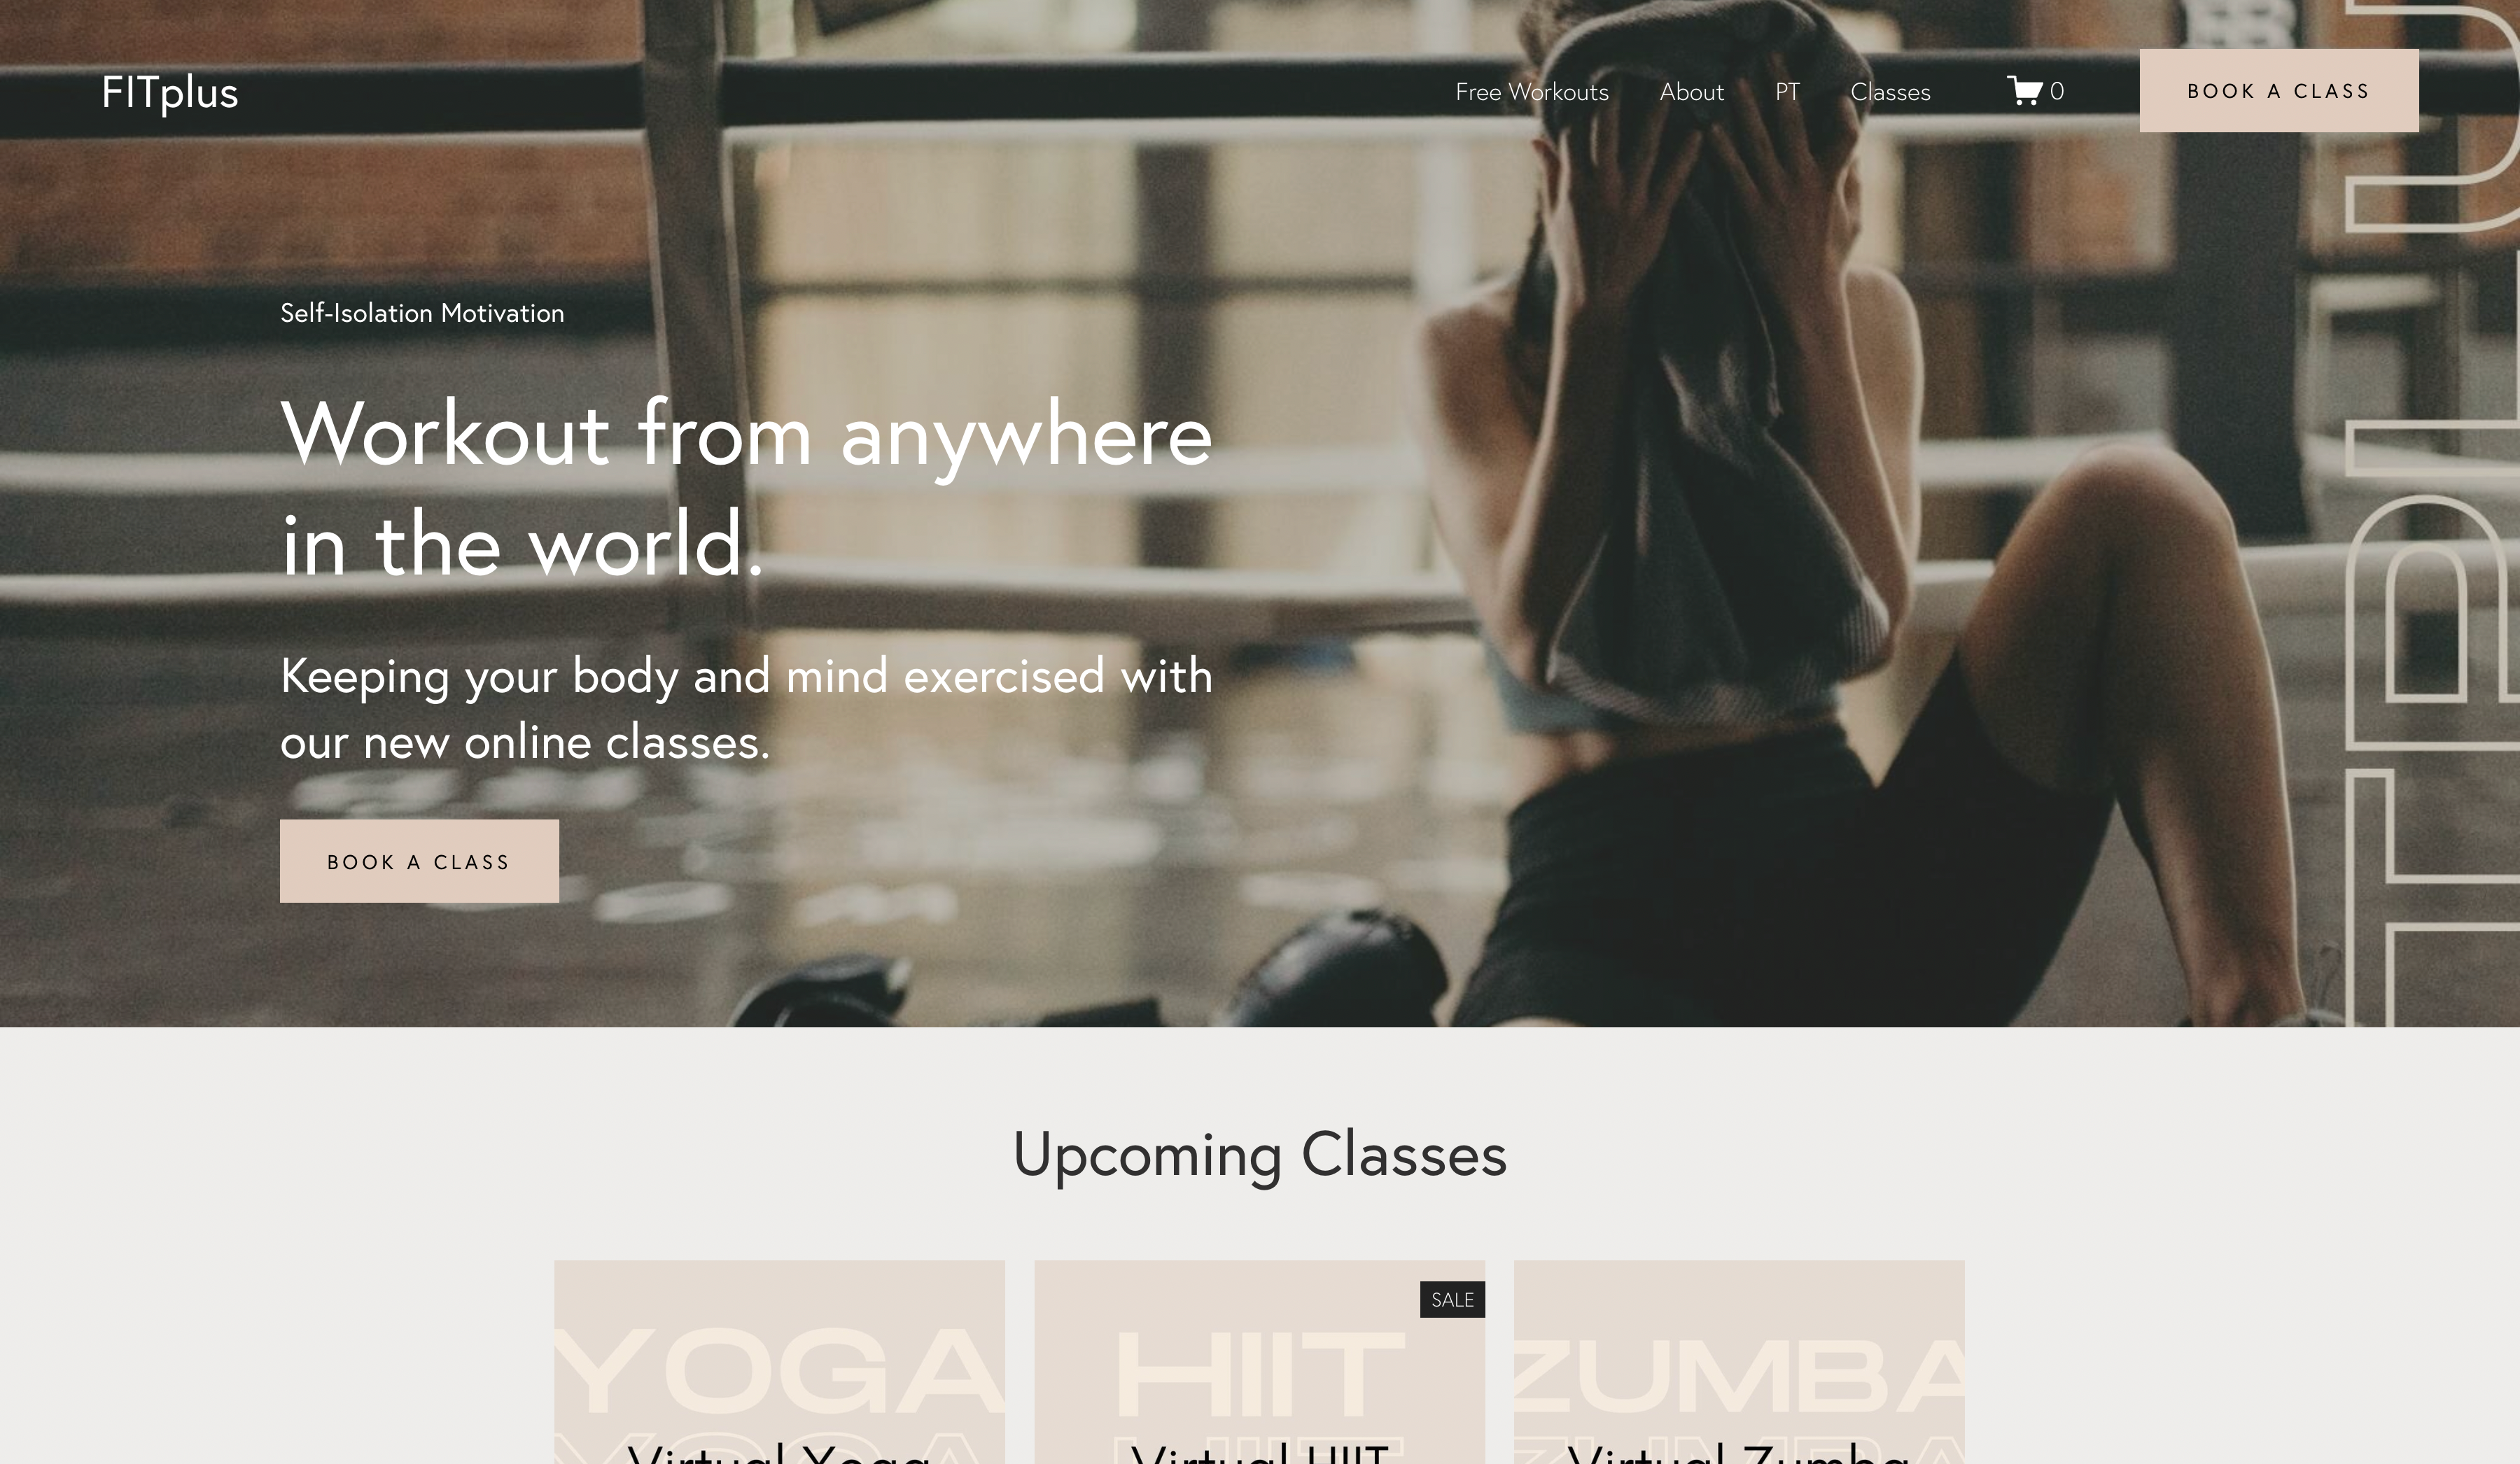 Hero_Section-best-squarespace-website-template-fitness-uk